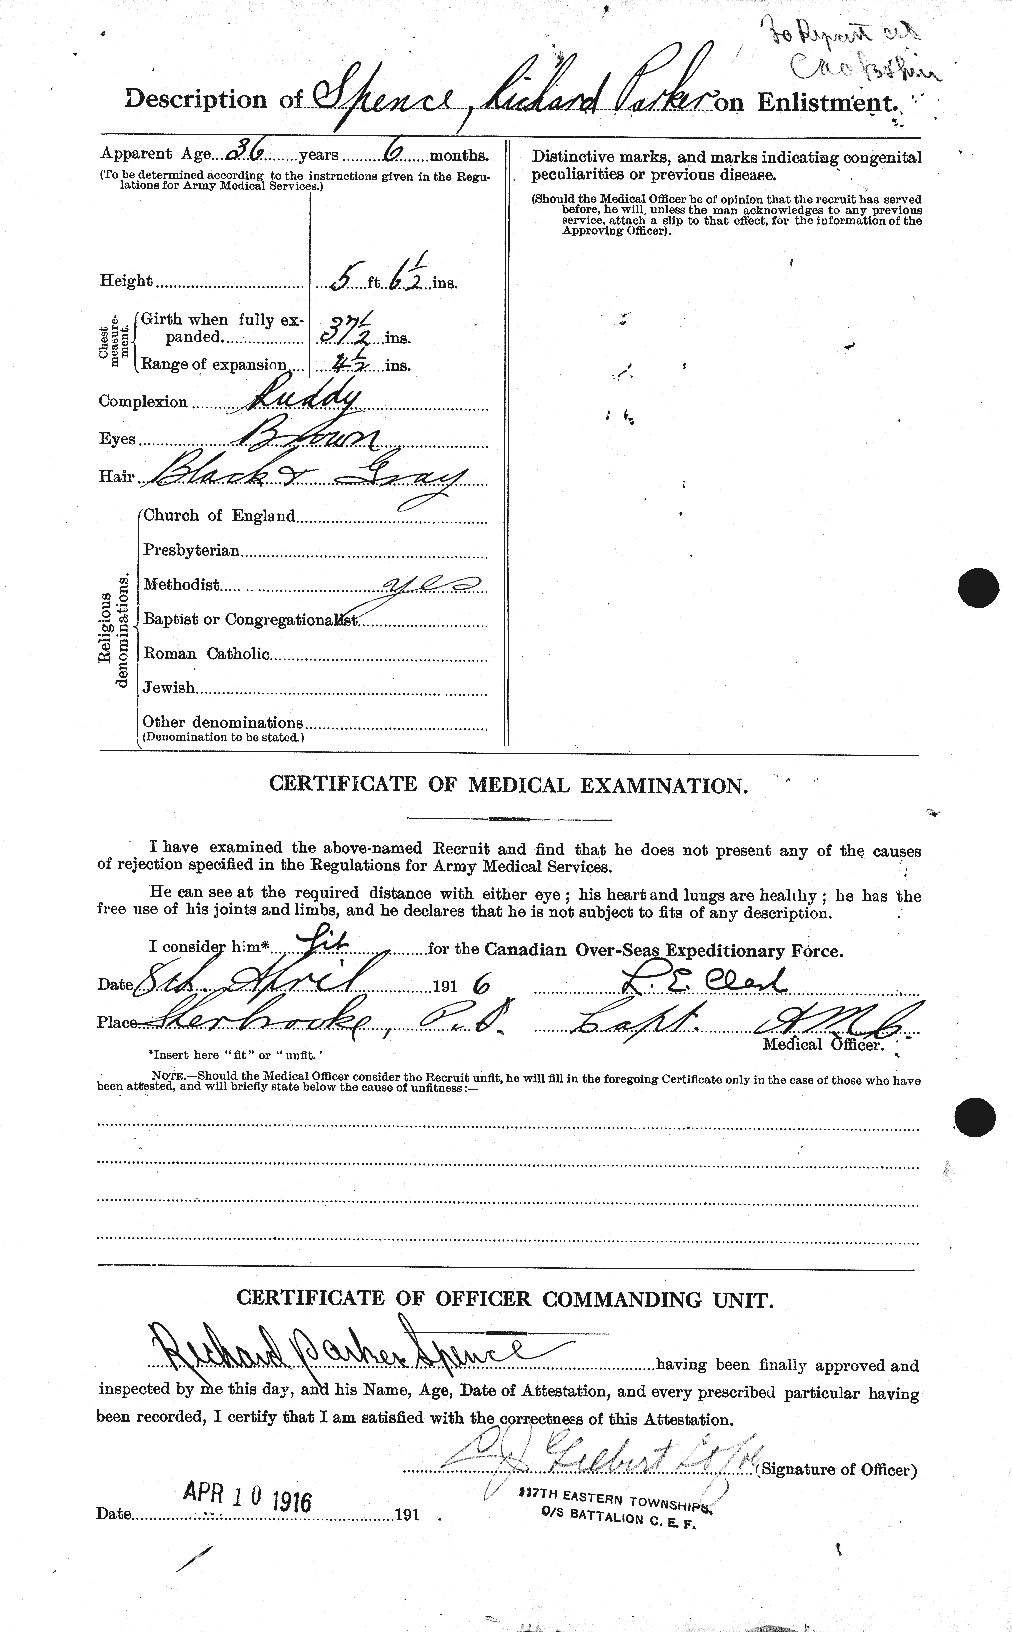 Personnel Records of the First World War - CEF 621410b